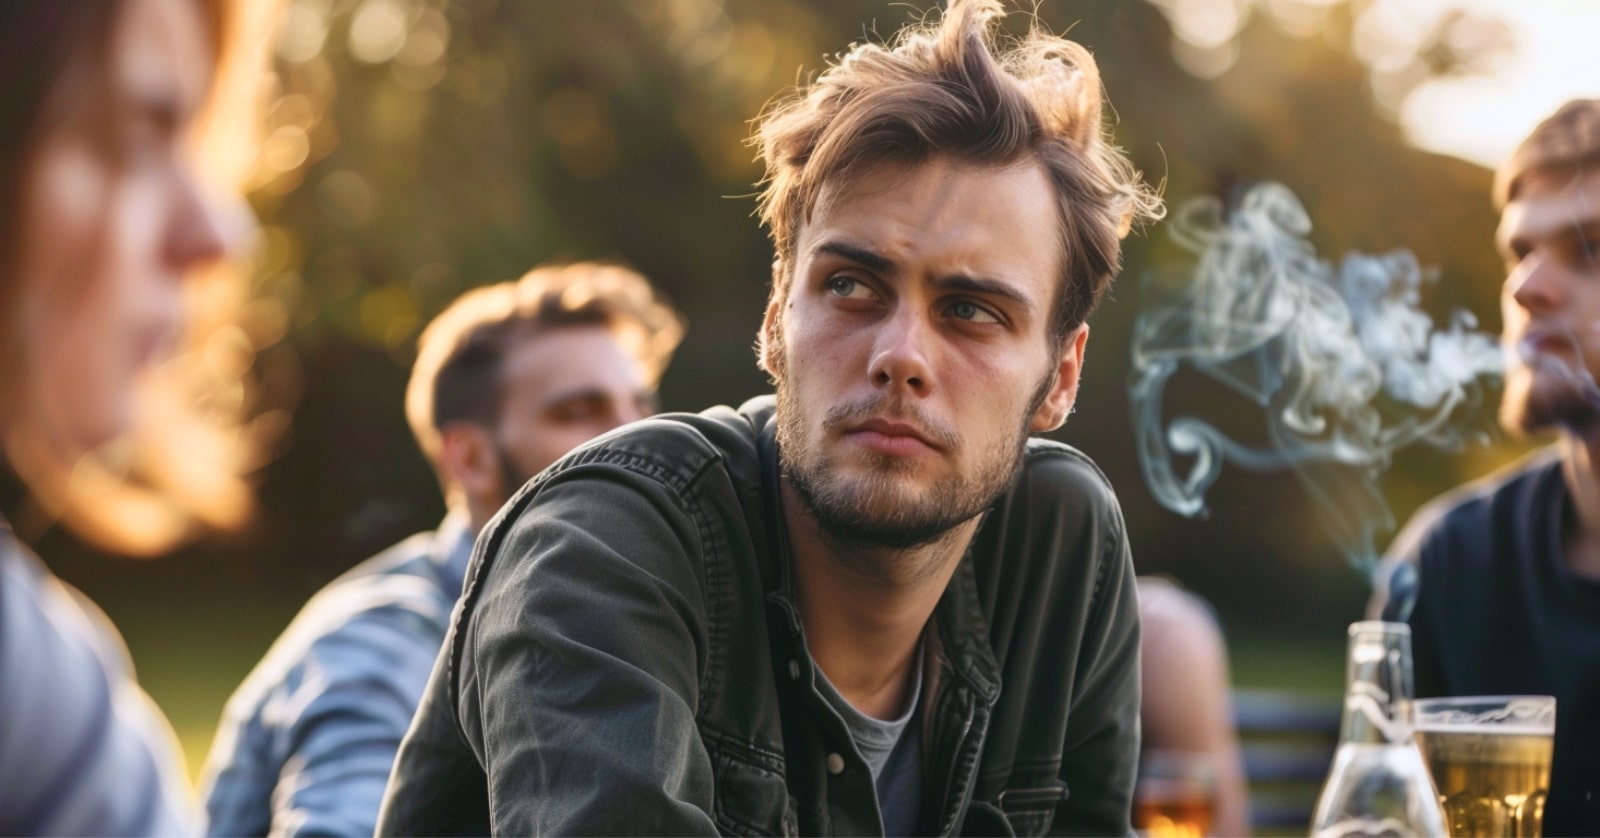 a young man with a concerned look on his face as he sits among friends who are drinking alcohol and smoking in the park